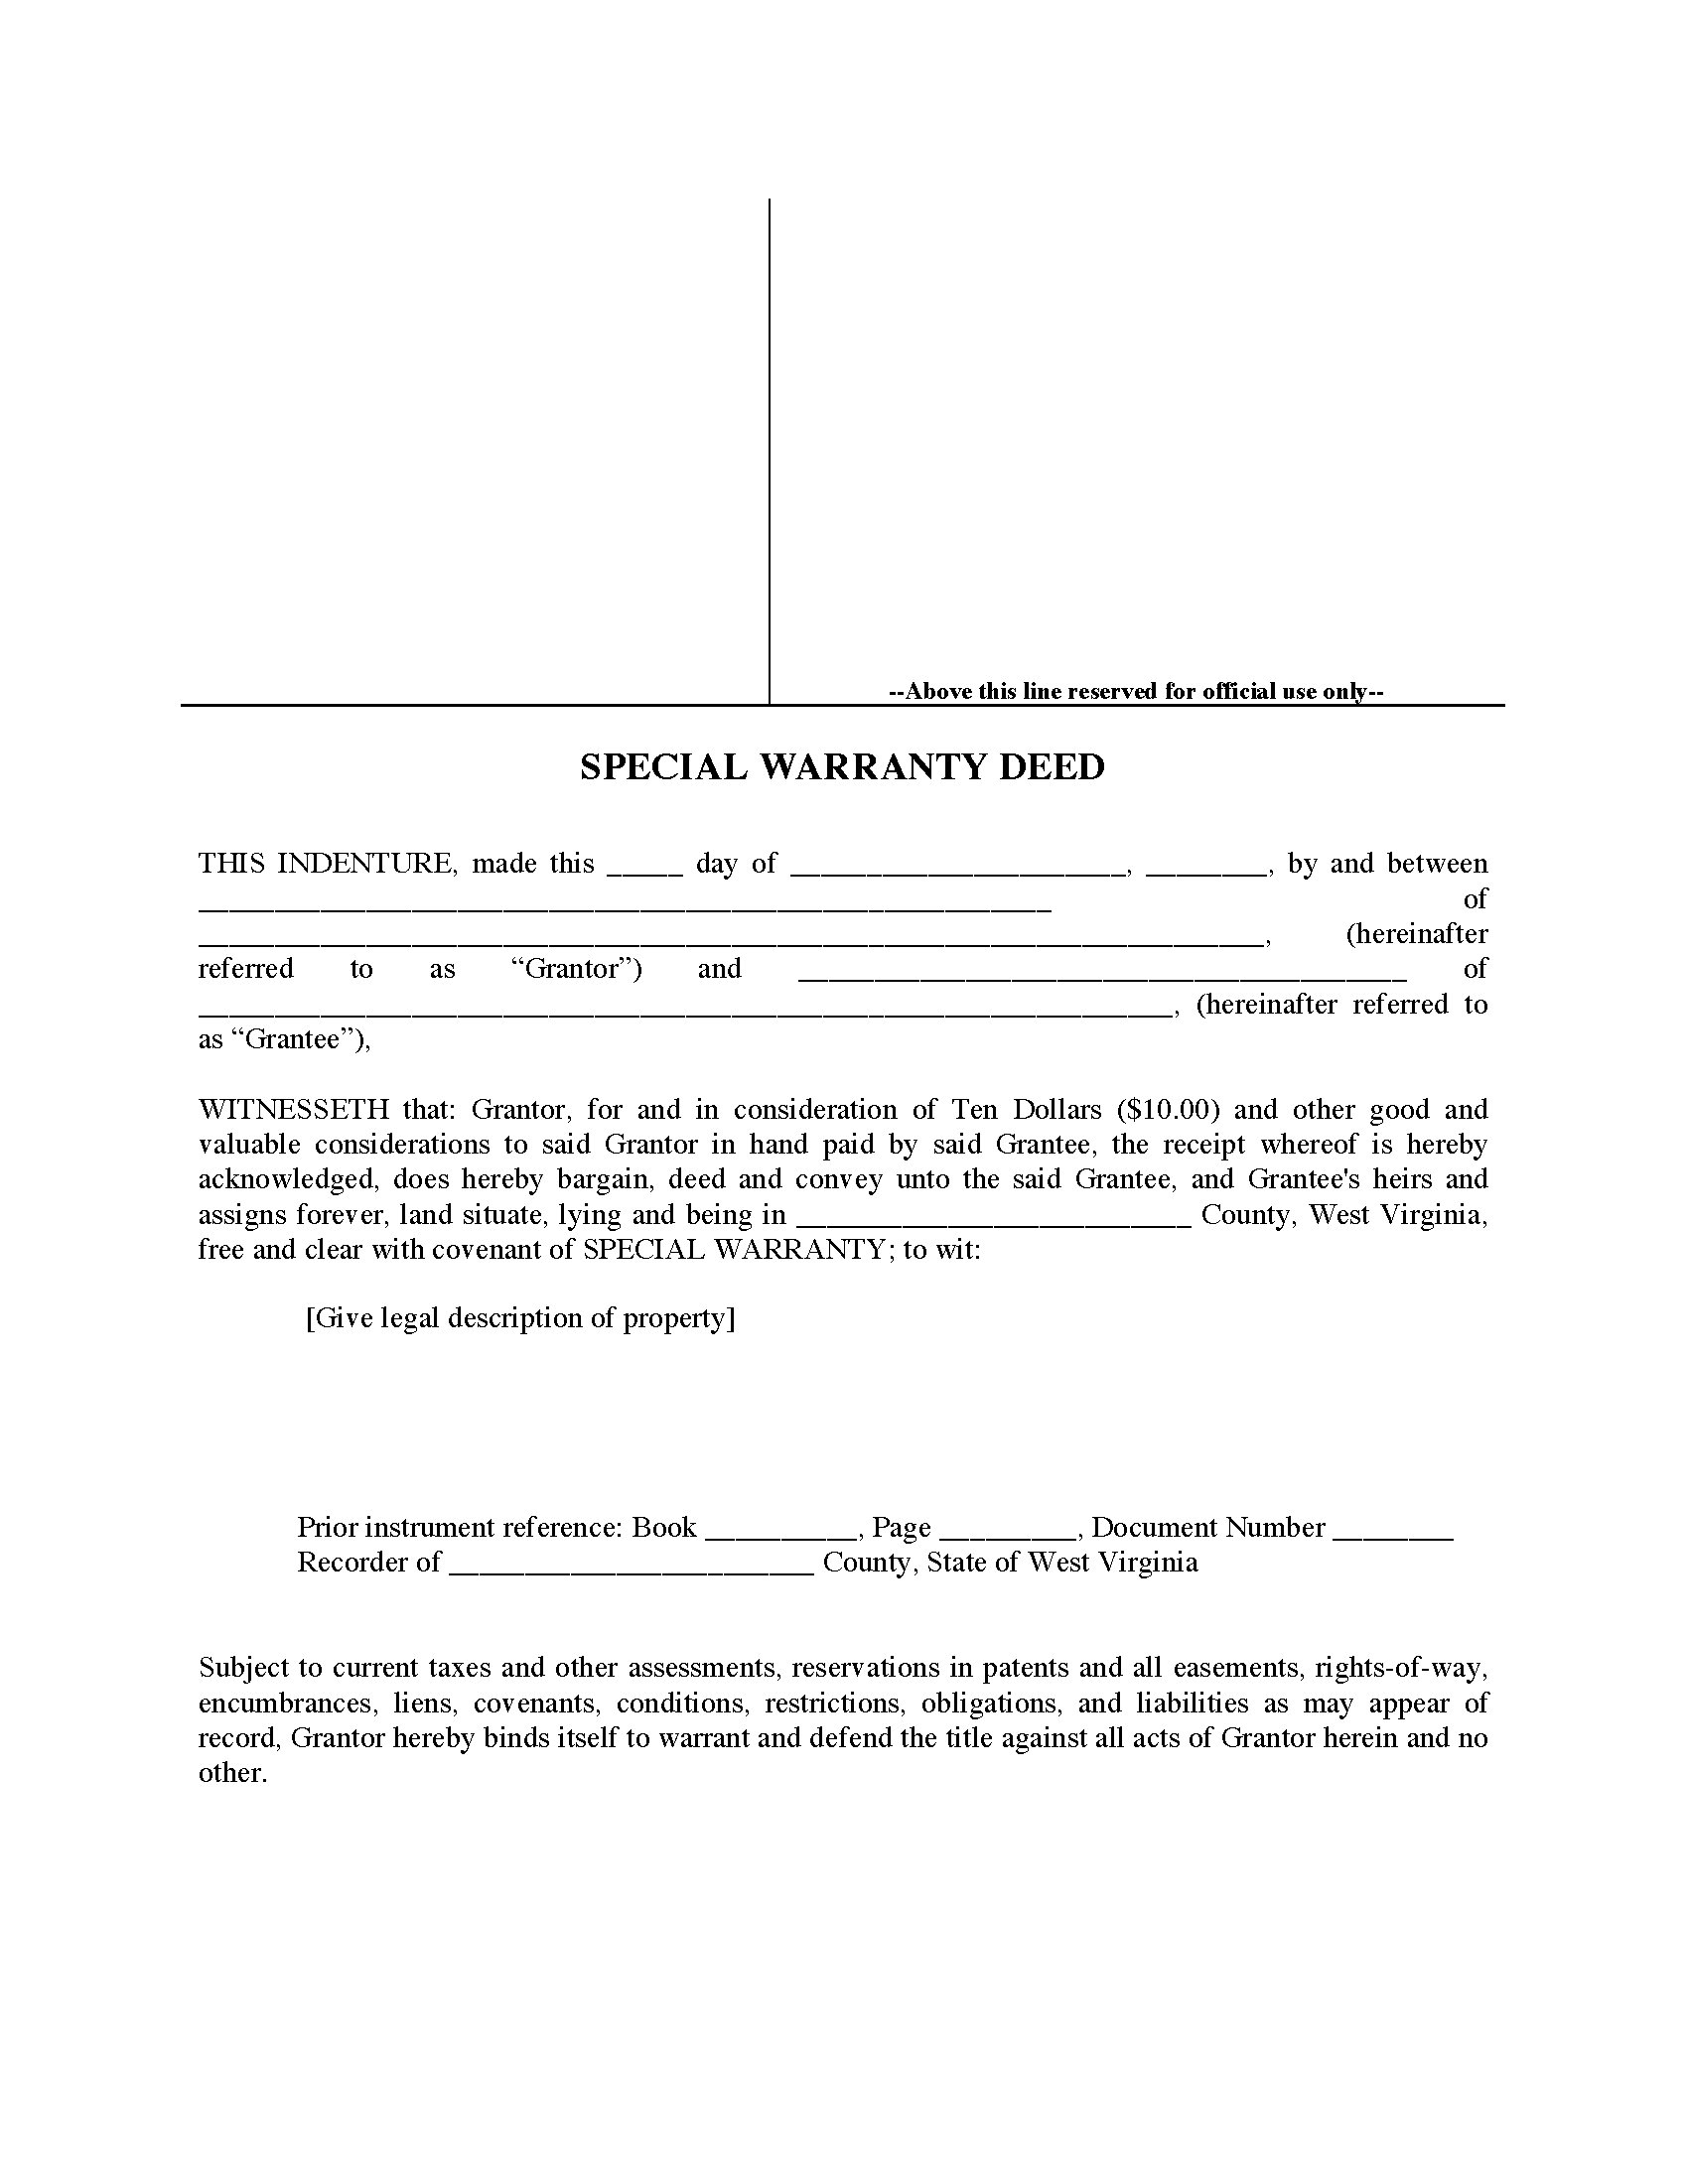 West Virginia Special Warranty Deed Legal Forms And Business Templates Megadox Com